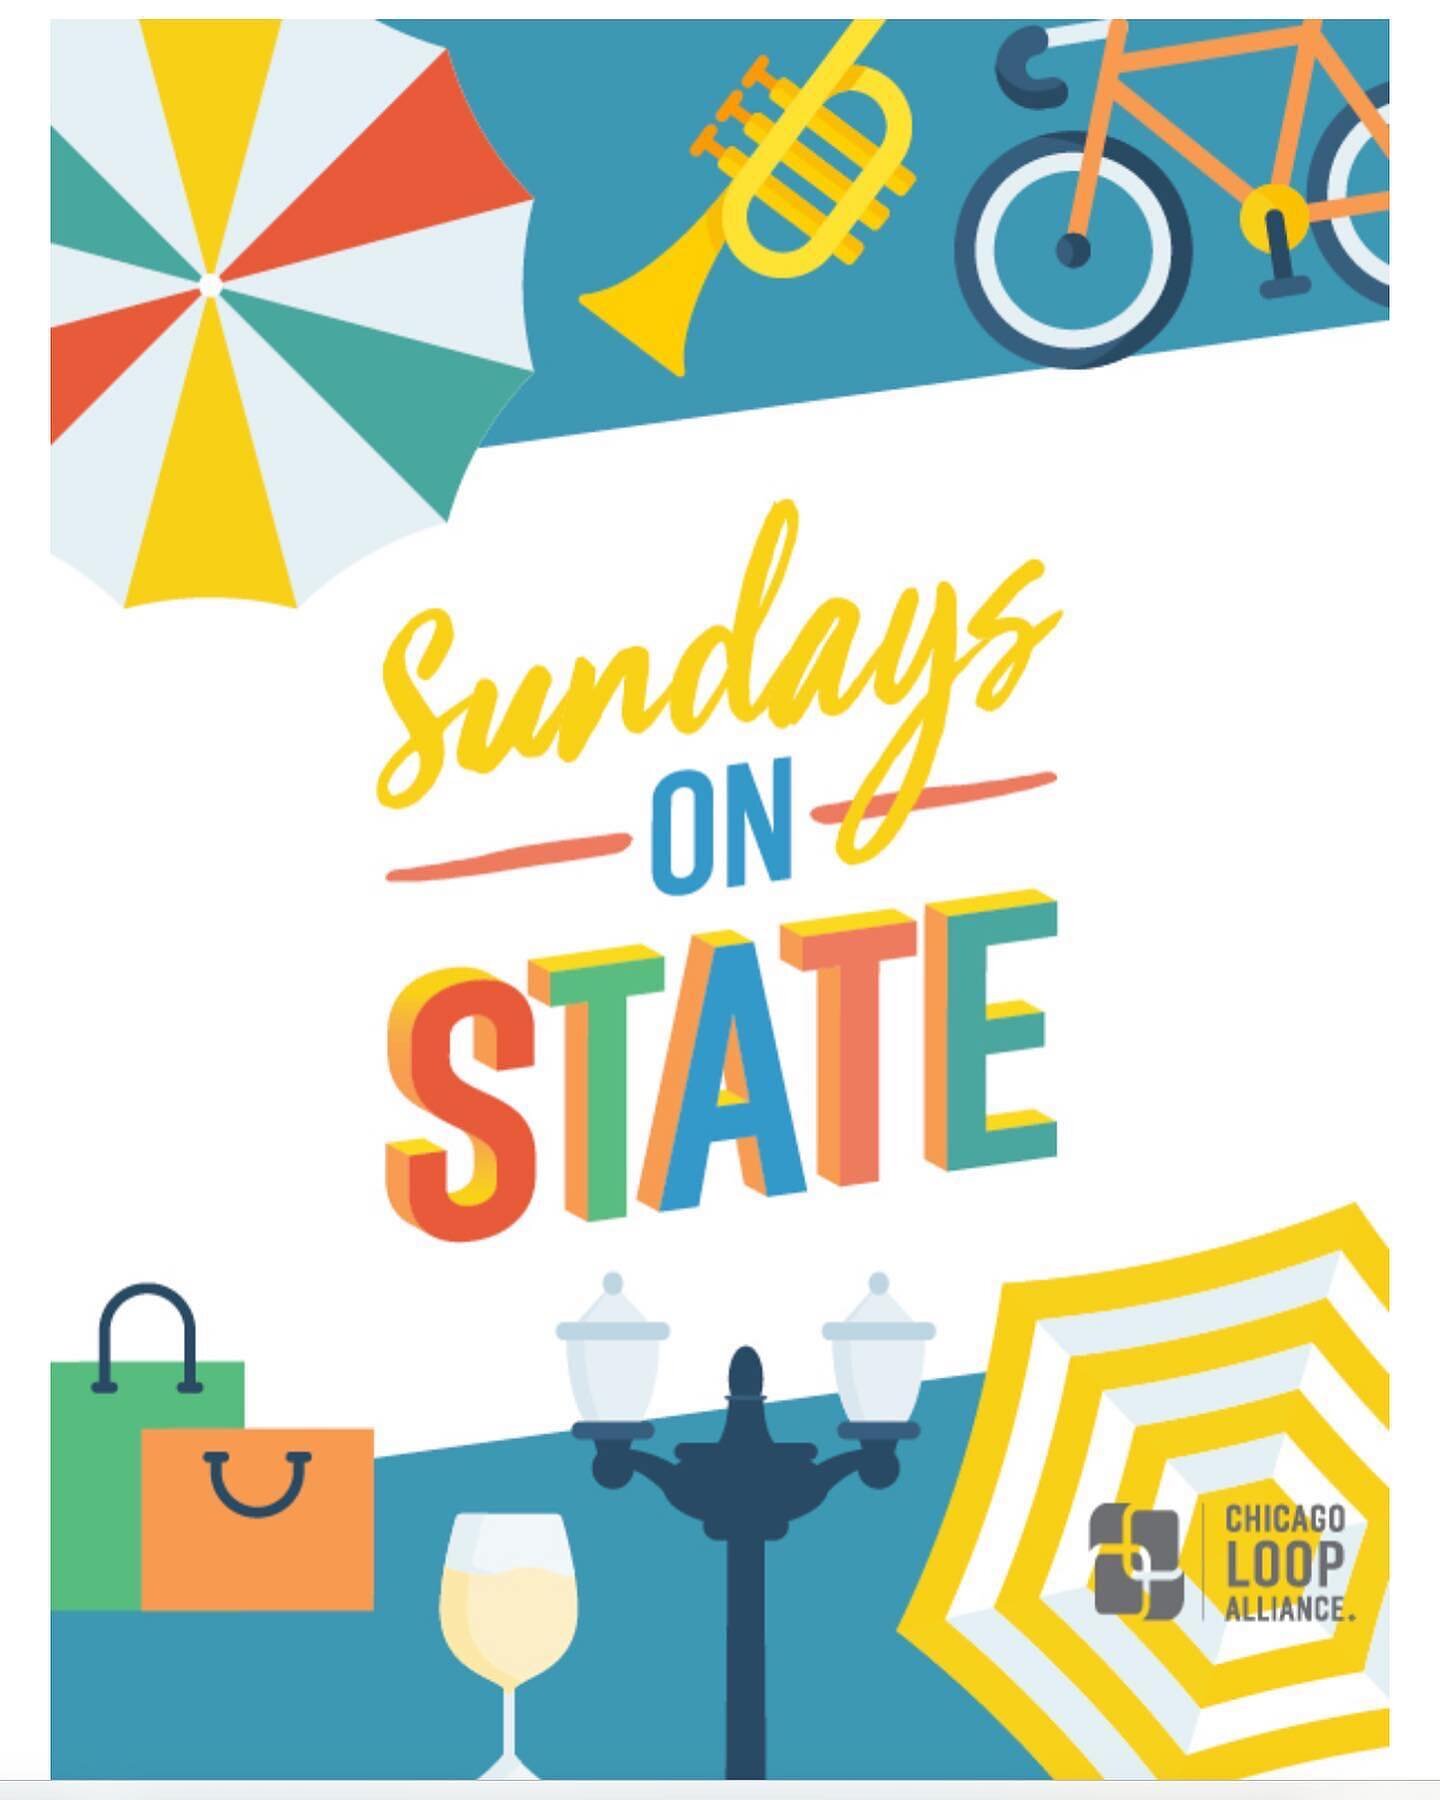 Join the @mobilize_creative today Sunday 8/7 from 11a-6p at Sundays on State! Let&rsquo;s Build, Let&rsquo;s Make Sound, Let&rsquo;s Write, Let&rsquo;s Draw, TOGETHER!!!! @a.lemusspont @aniimate_studio @mraquil @werdmvmnt